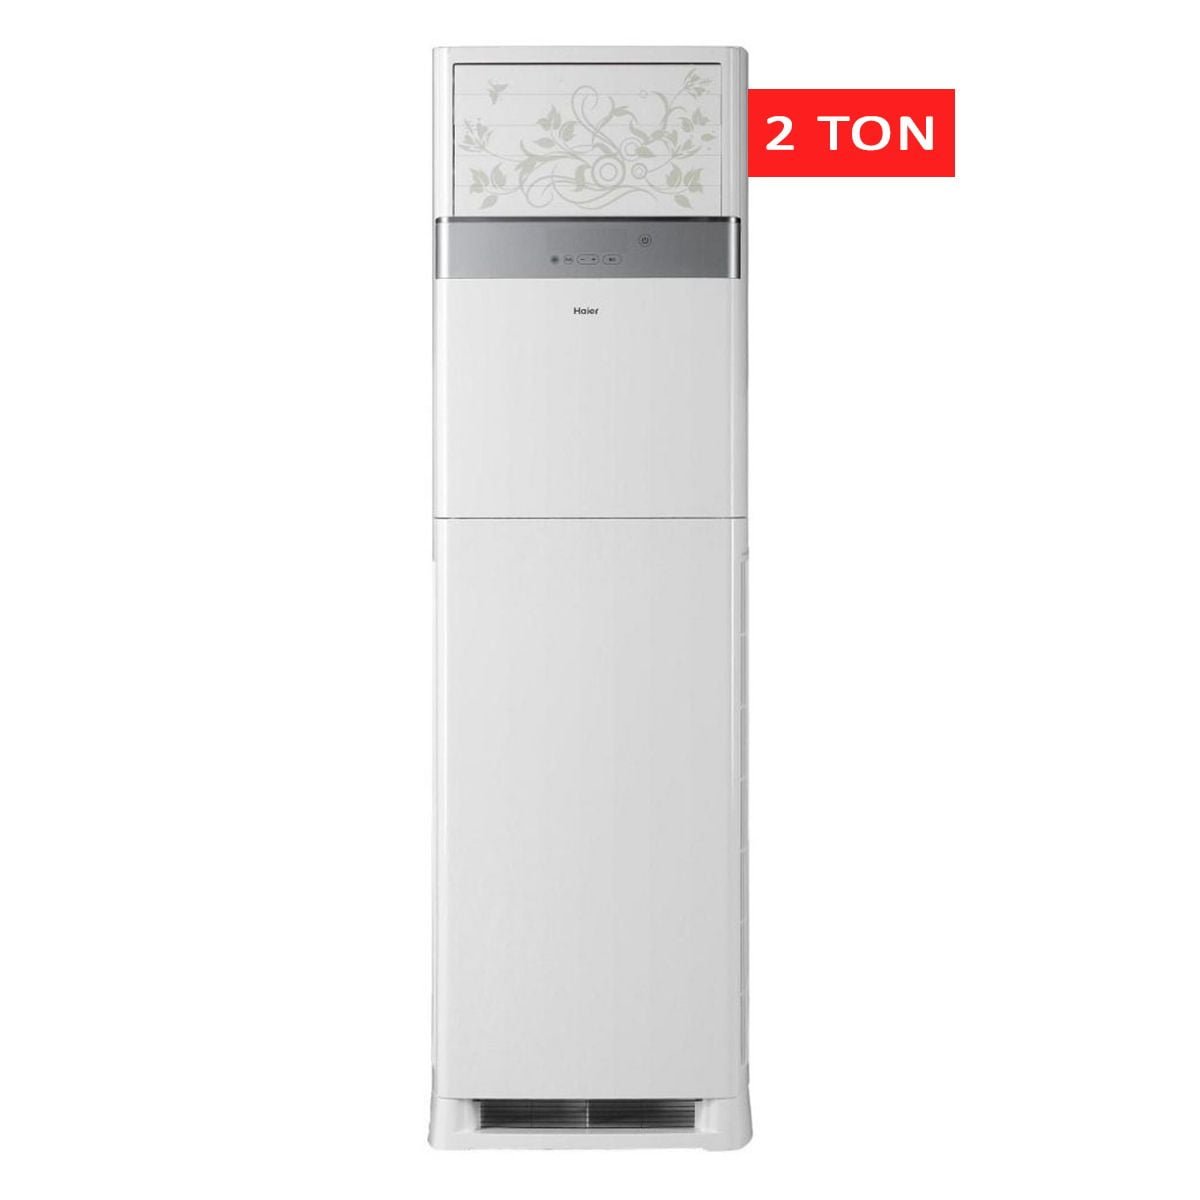 Introducing the Haier HPU-24HE/DC 2 Ton Inverter Floor Standing AC